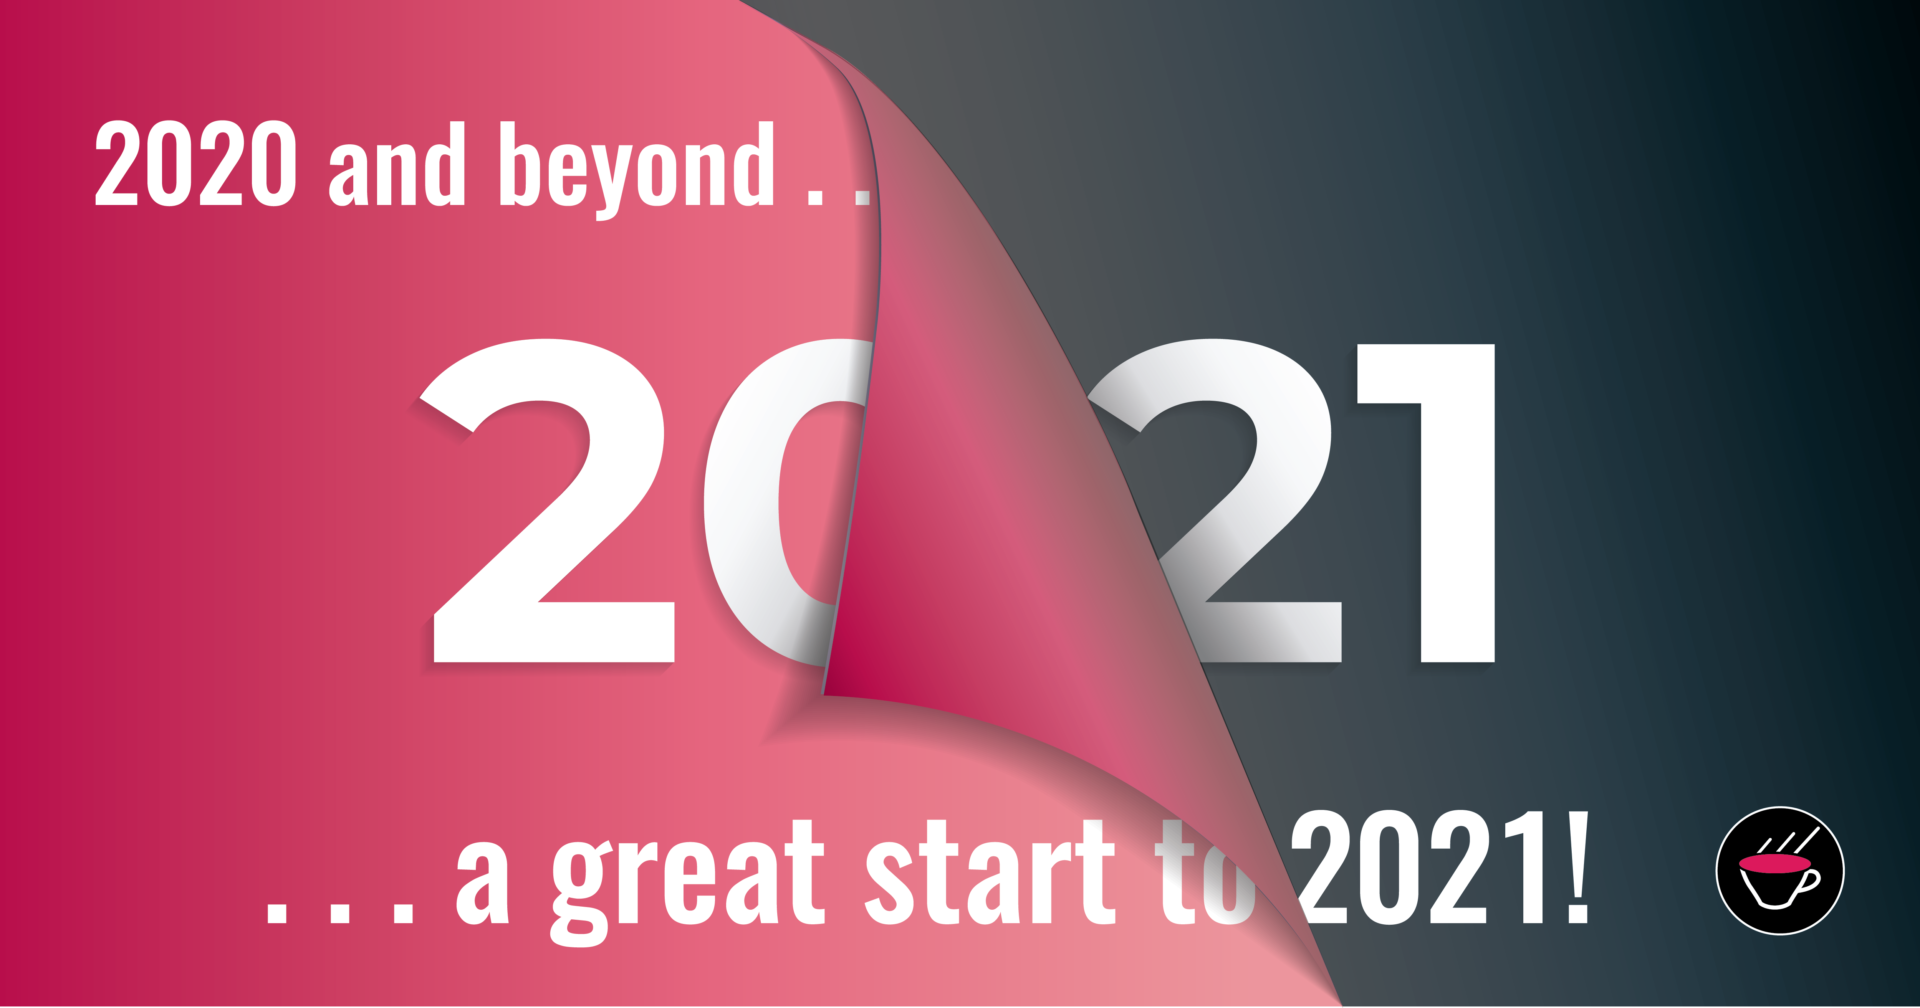 2020 and beyond – a great start to 2021